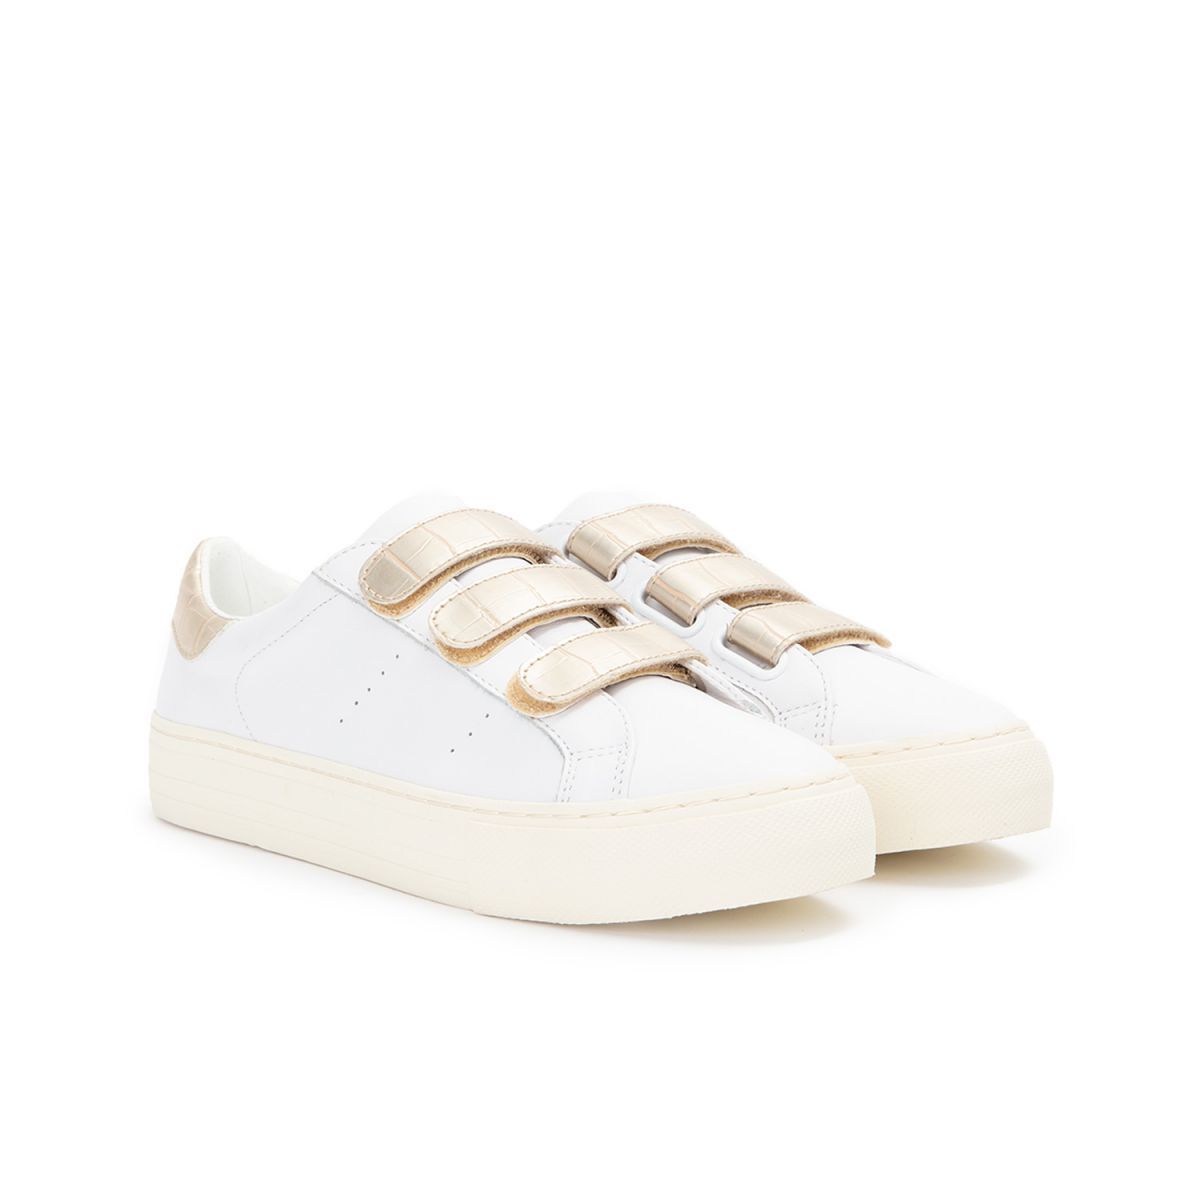 Arcade Straps White Gold Sneakers KNGDSC0474 - 3